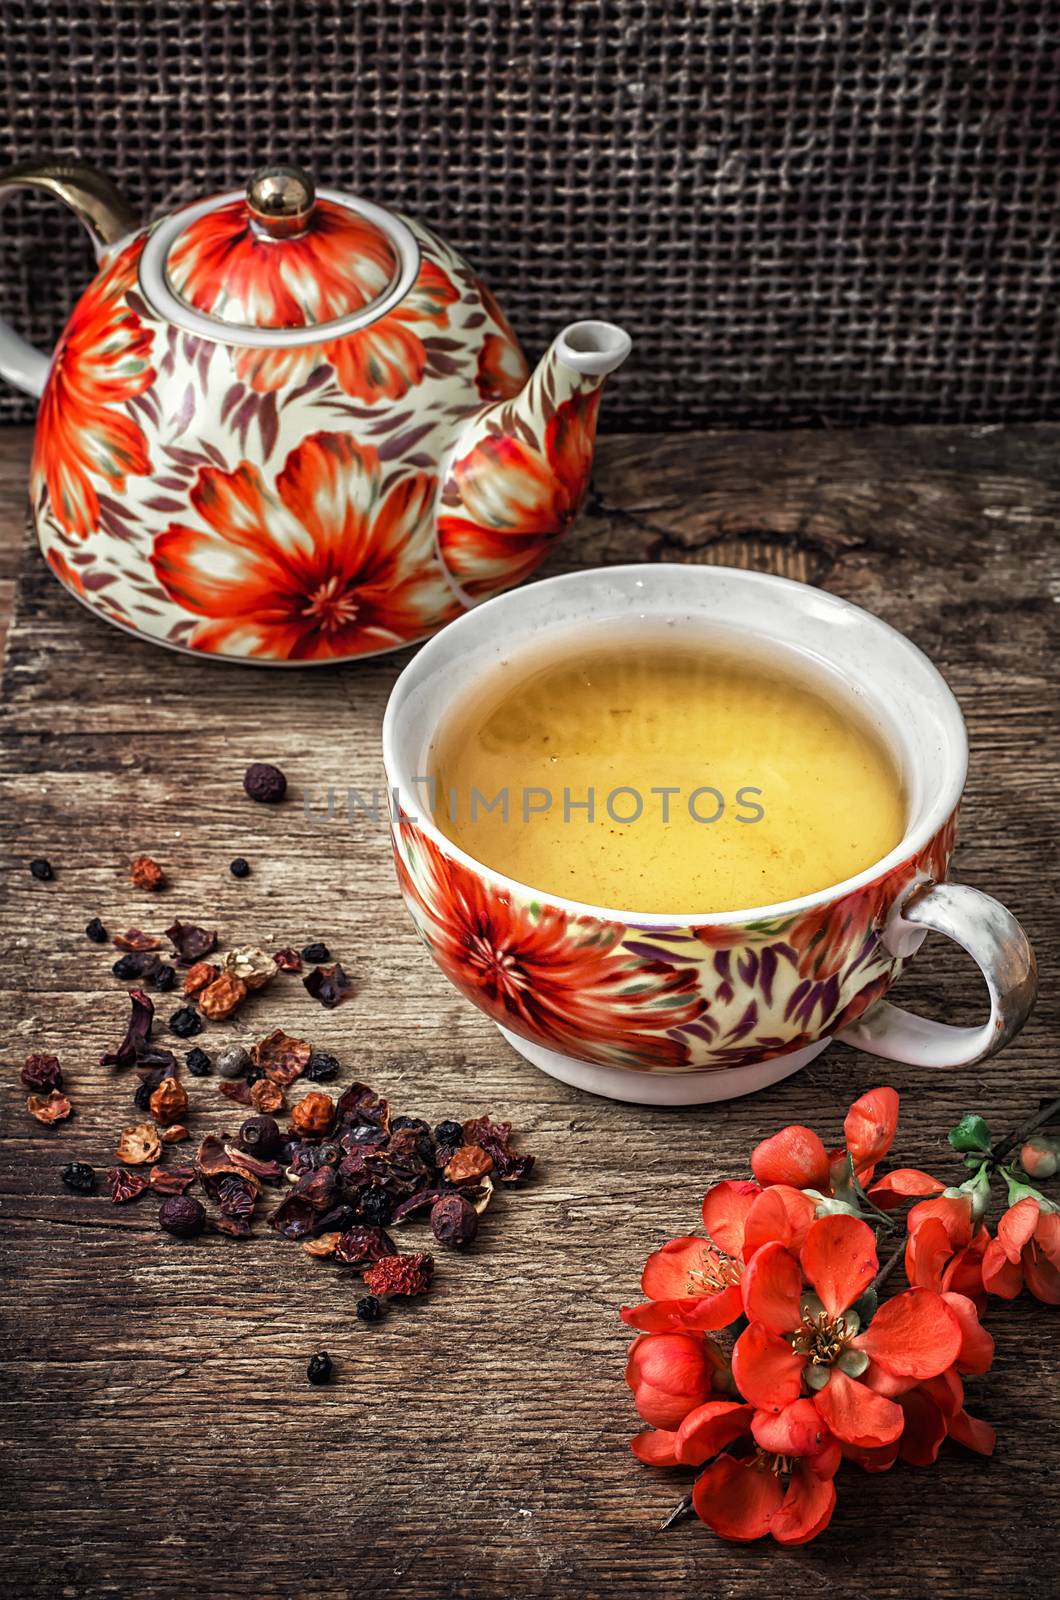 porcelain cup of fragrant tea for medicinal herbs in retro style.photo tinted